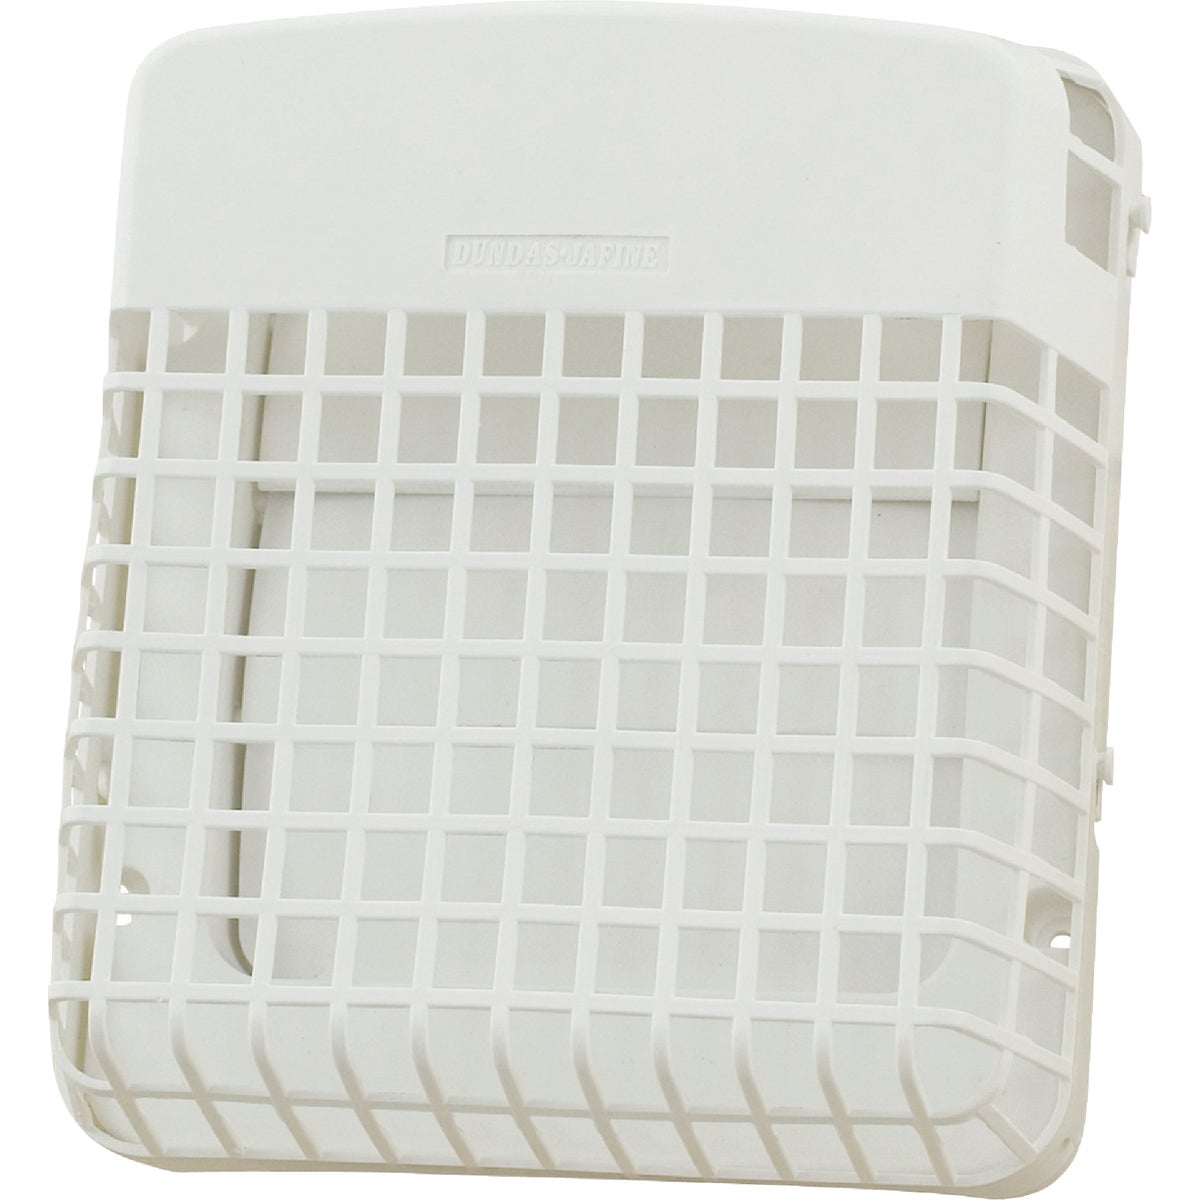 Item 276200, Low profile 4" louvered cap with removable pest guard to keep out unwanted 